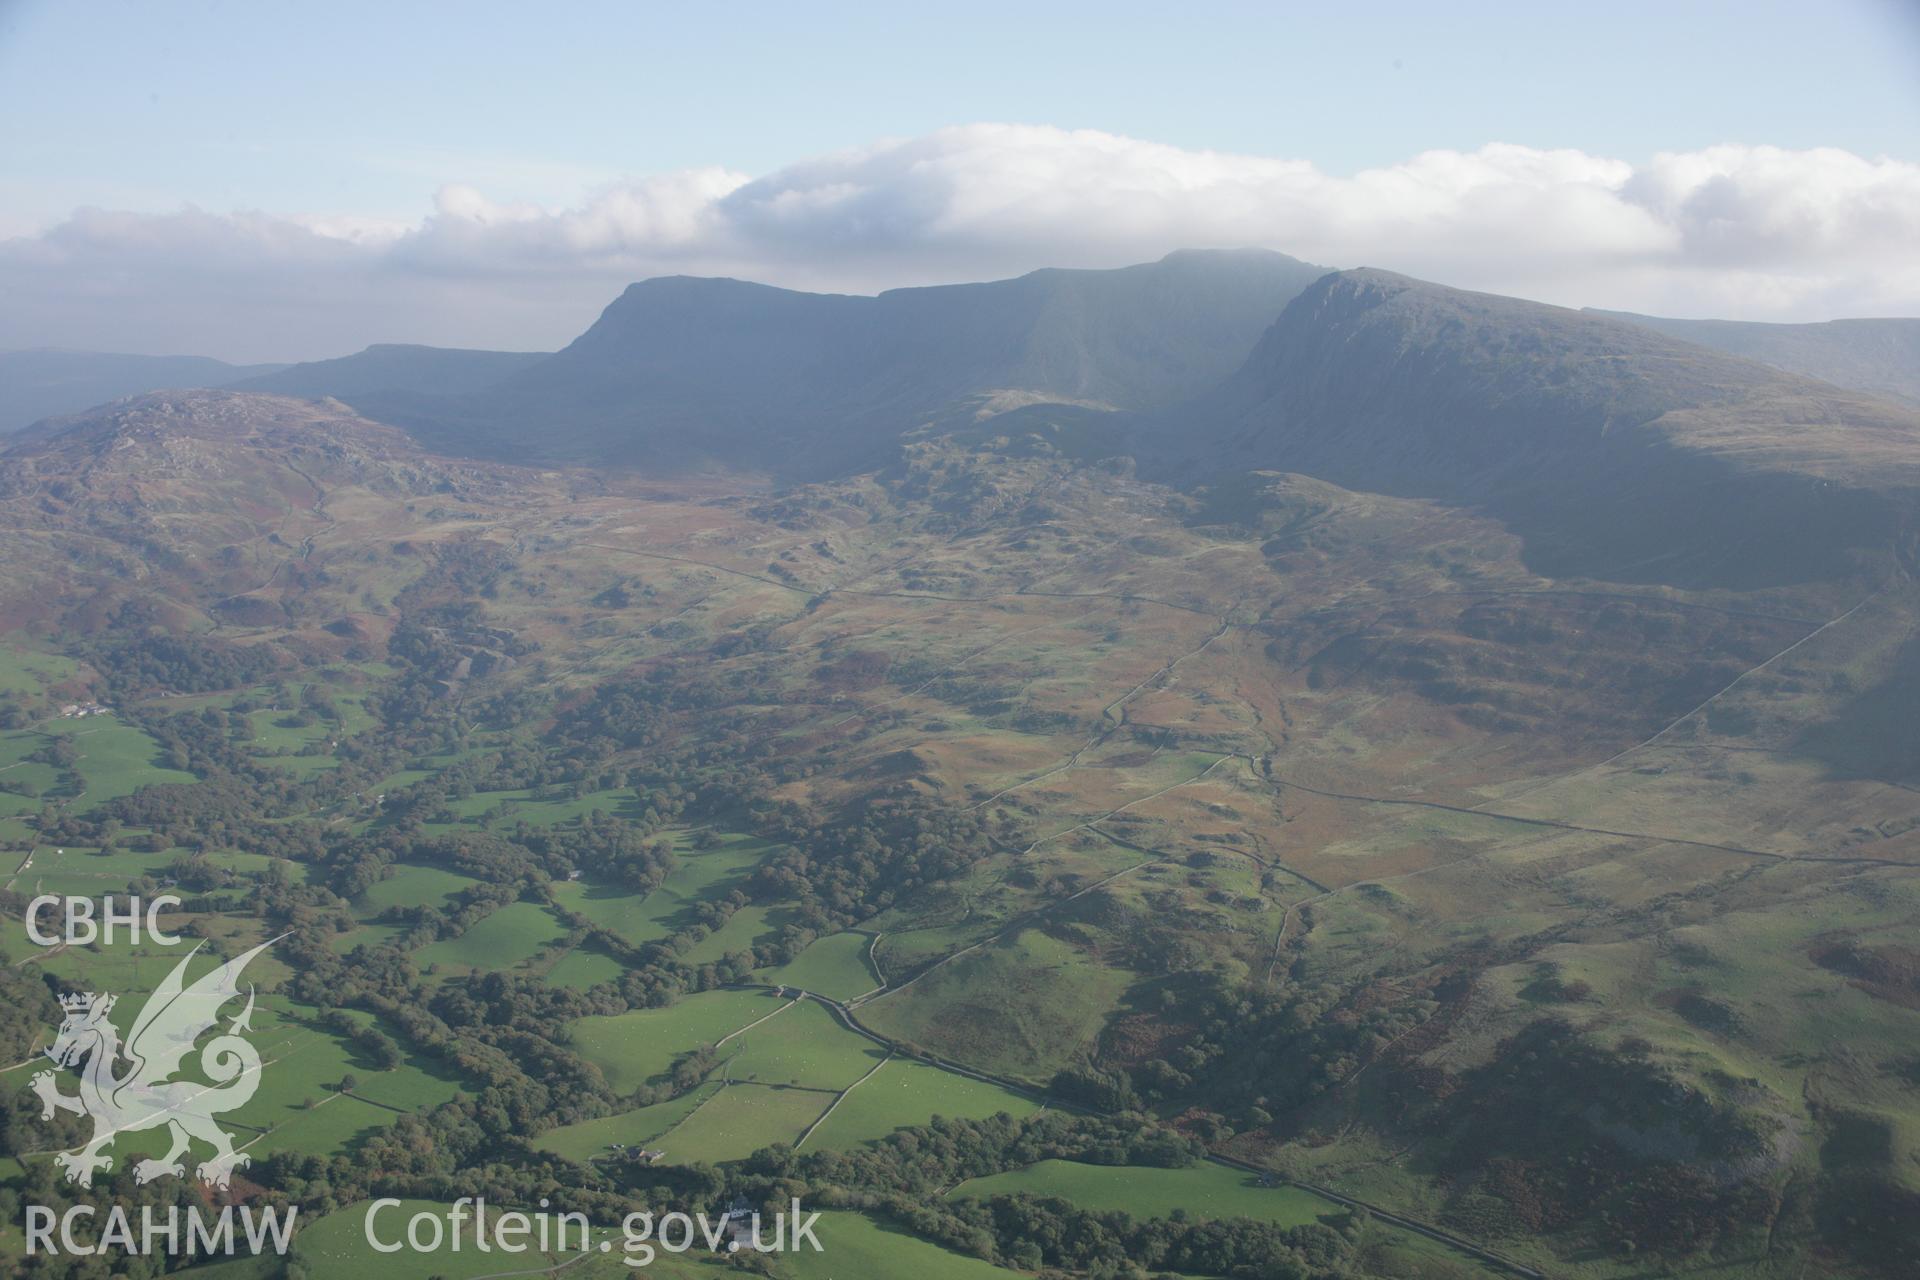 RCAHMW colour oblique aerial photograph of Cadair Idris. A wide landscape view looking south-east. Taken on 17 October 2005 by Toby Driver